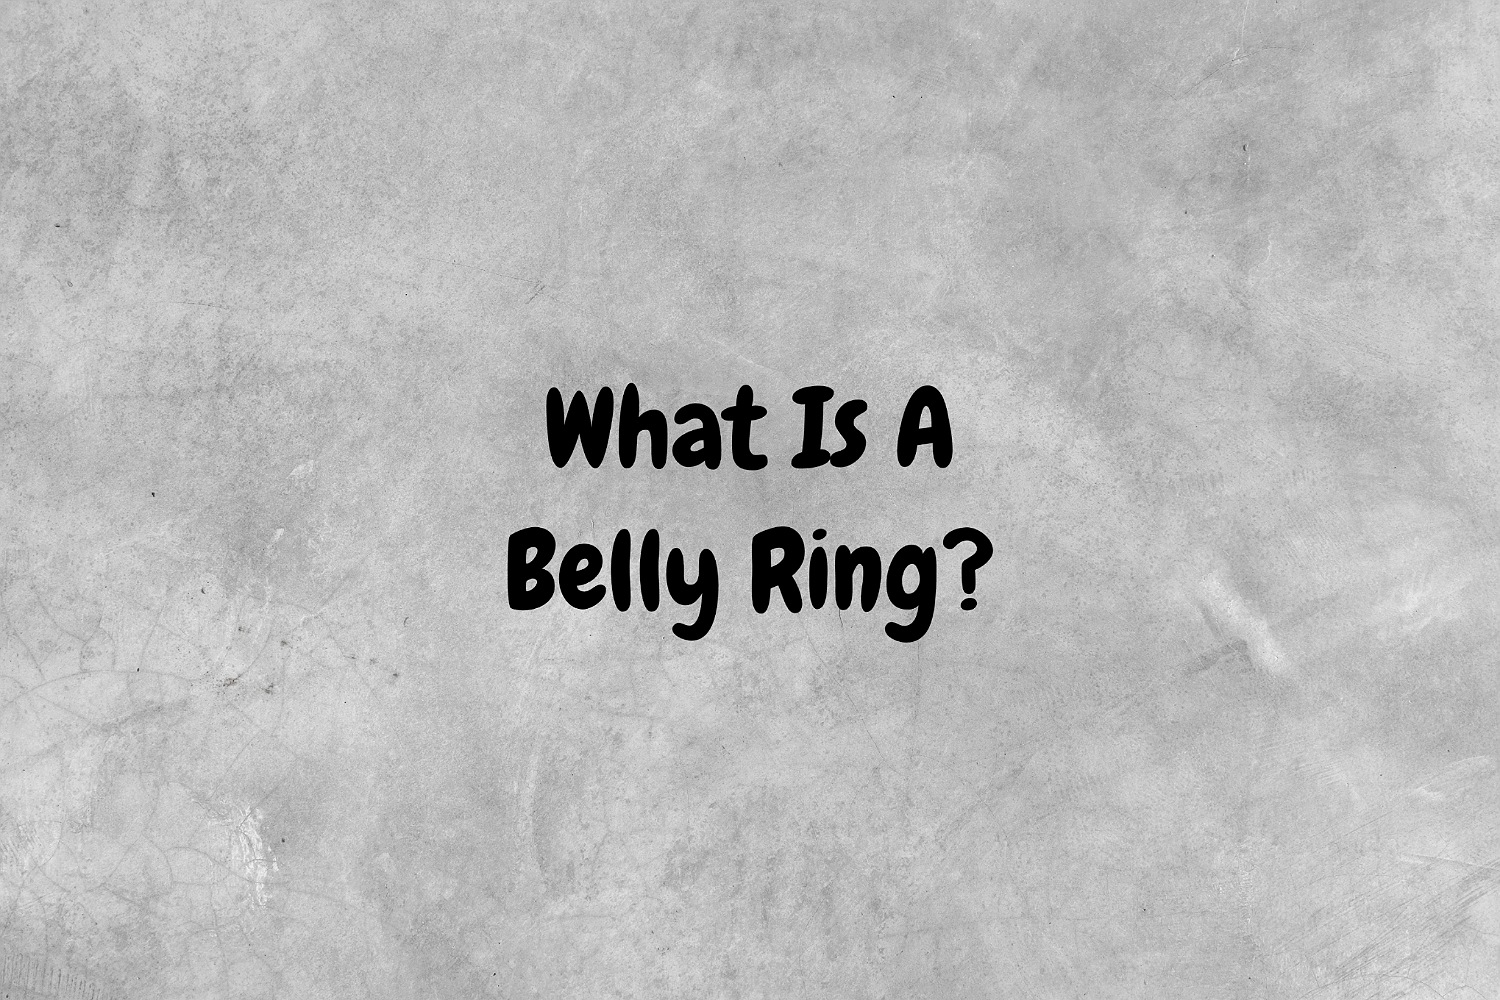 An image with a gray background that has black text proposing the question, "What is a belly ring?".